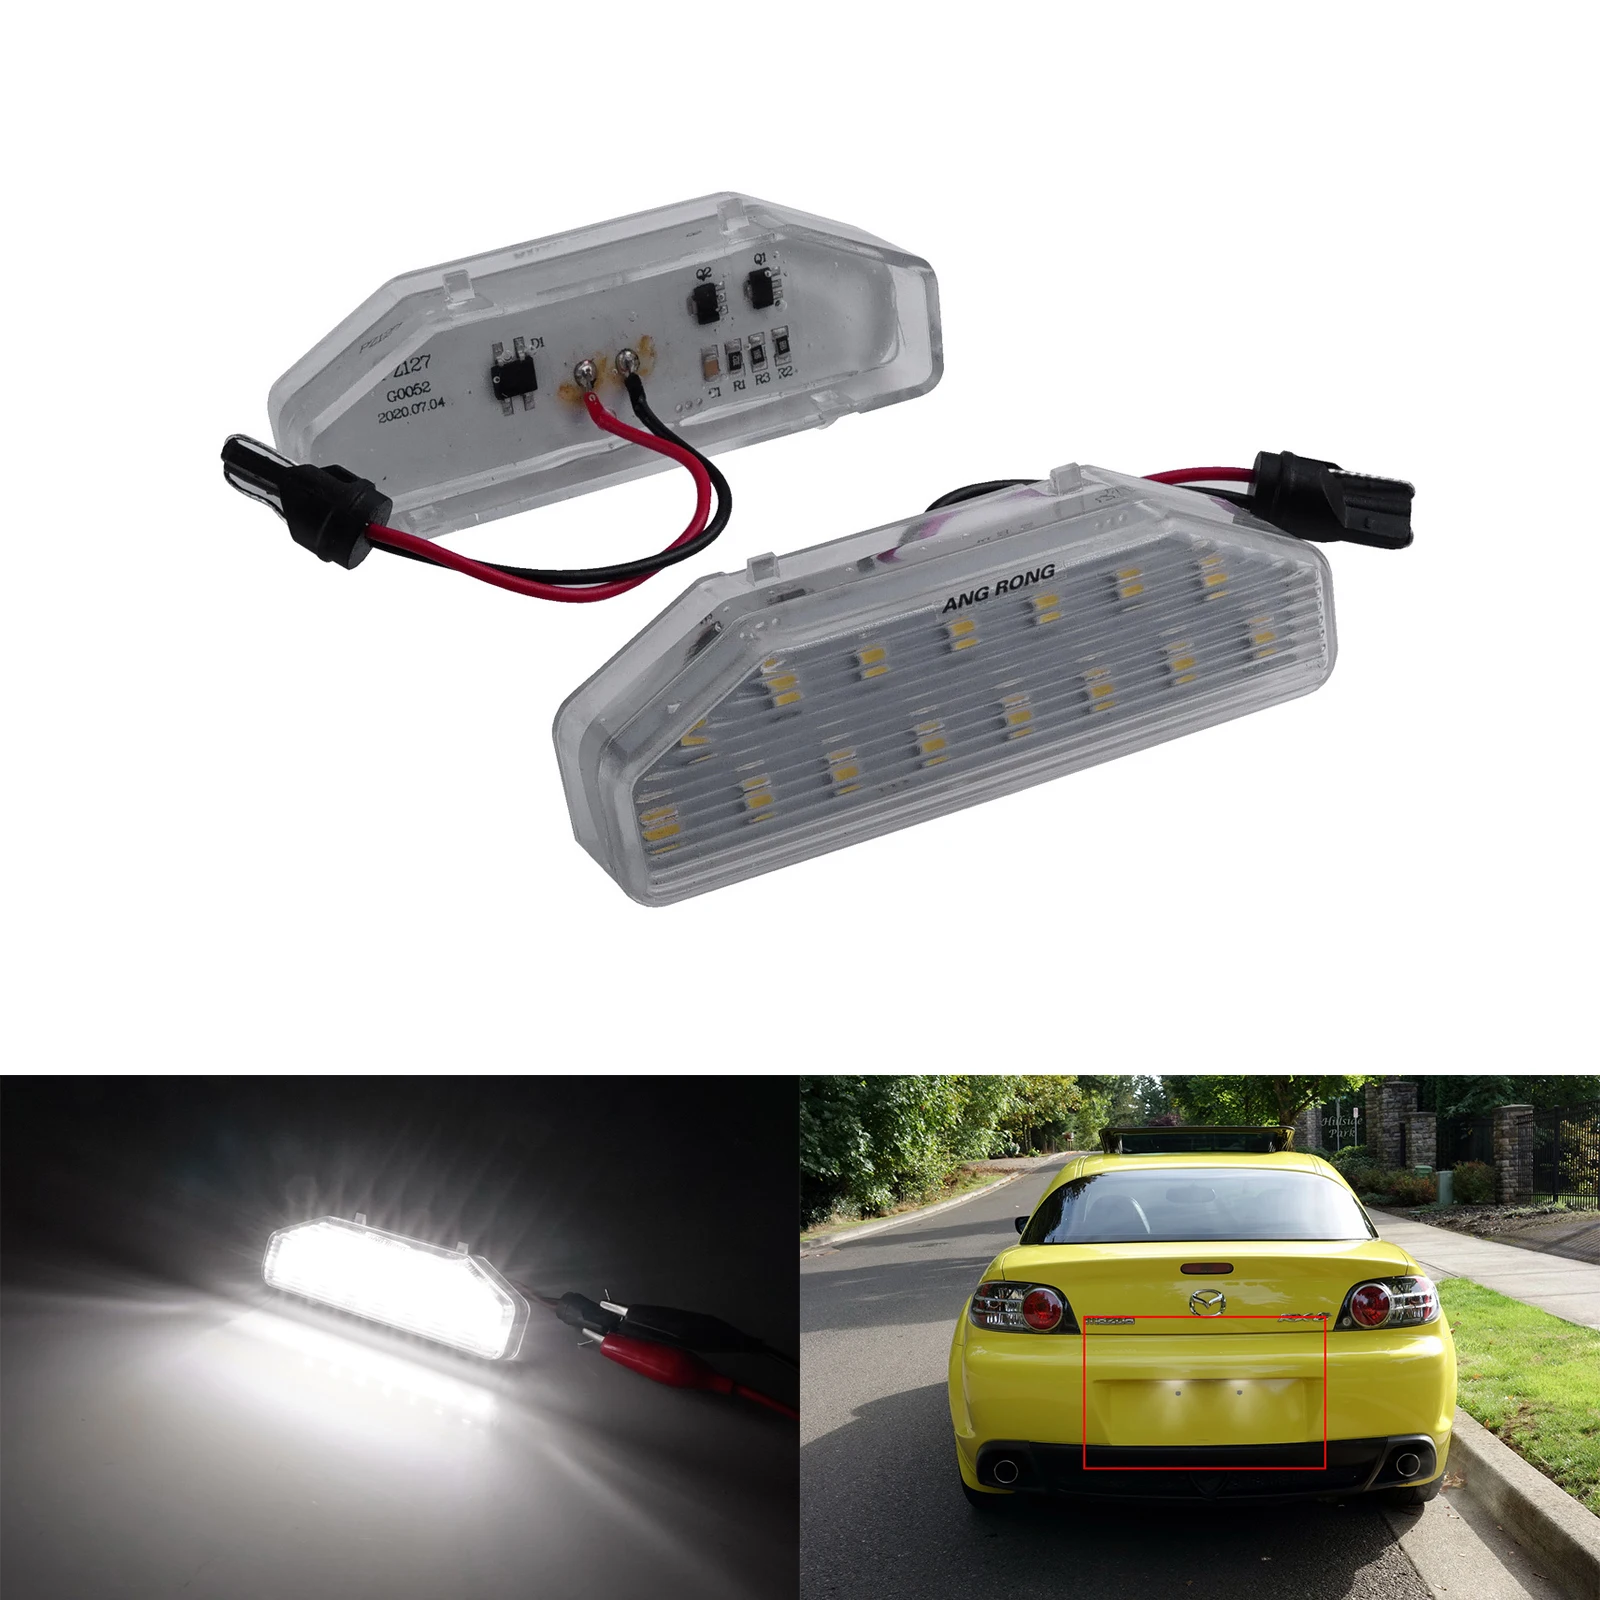 

ANGRONG 2X 7000K White LED Licence Plate Light Fit Mazda RX-8 2003-12 Atenza Mazda6 2007-12